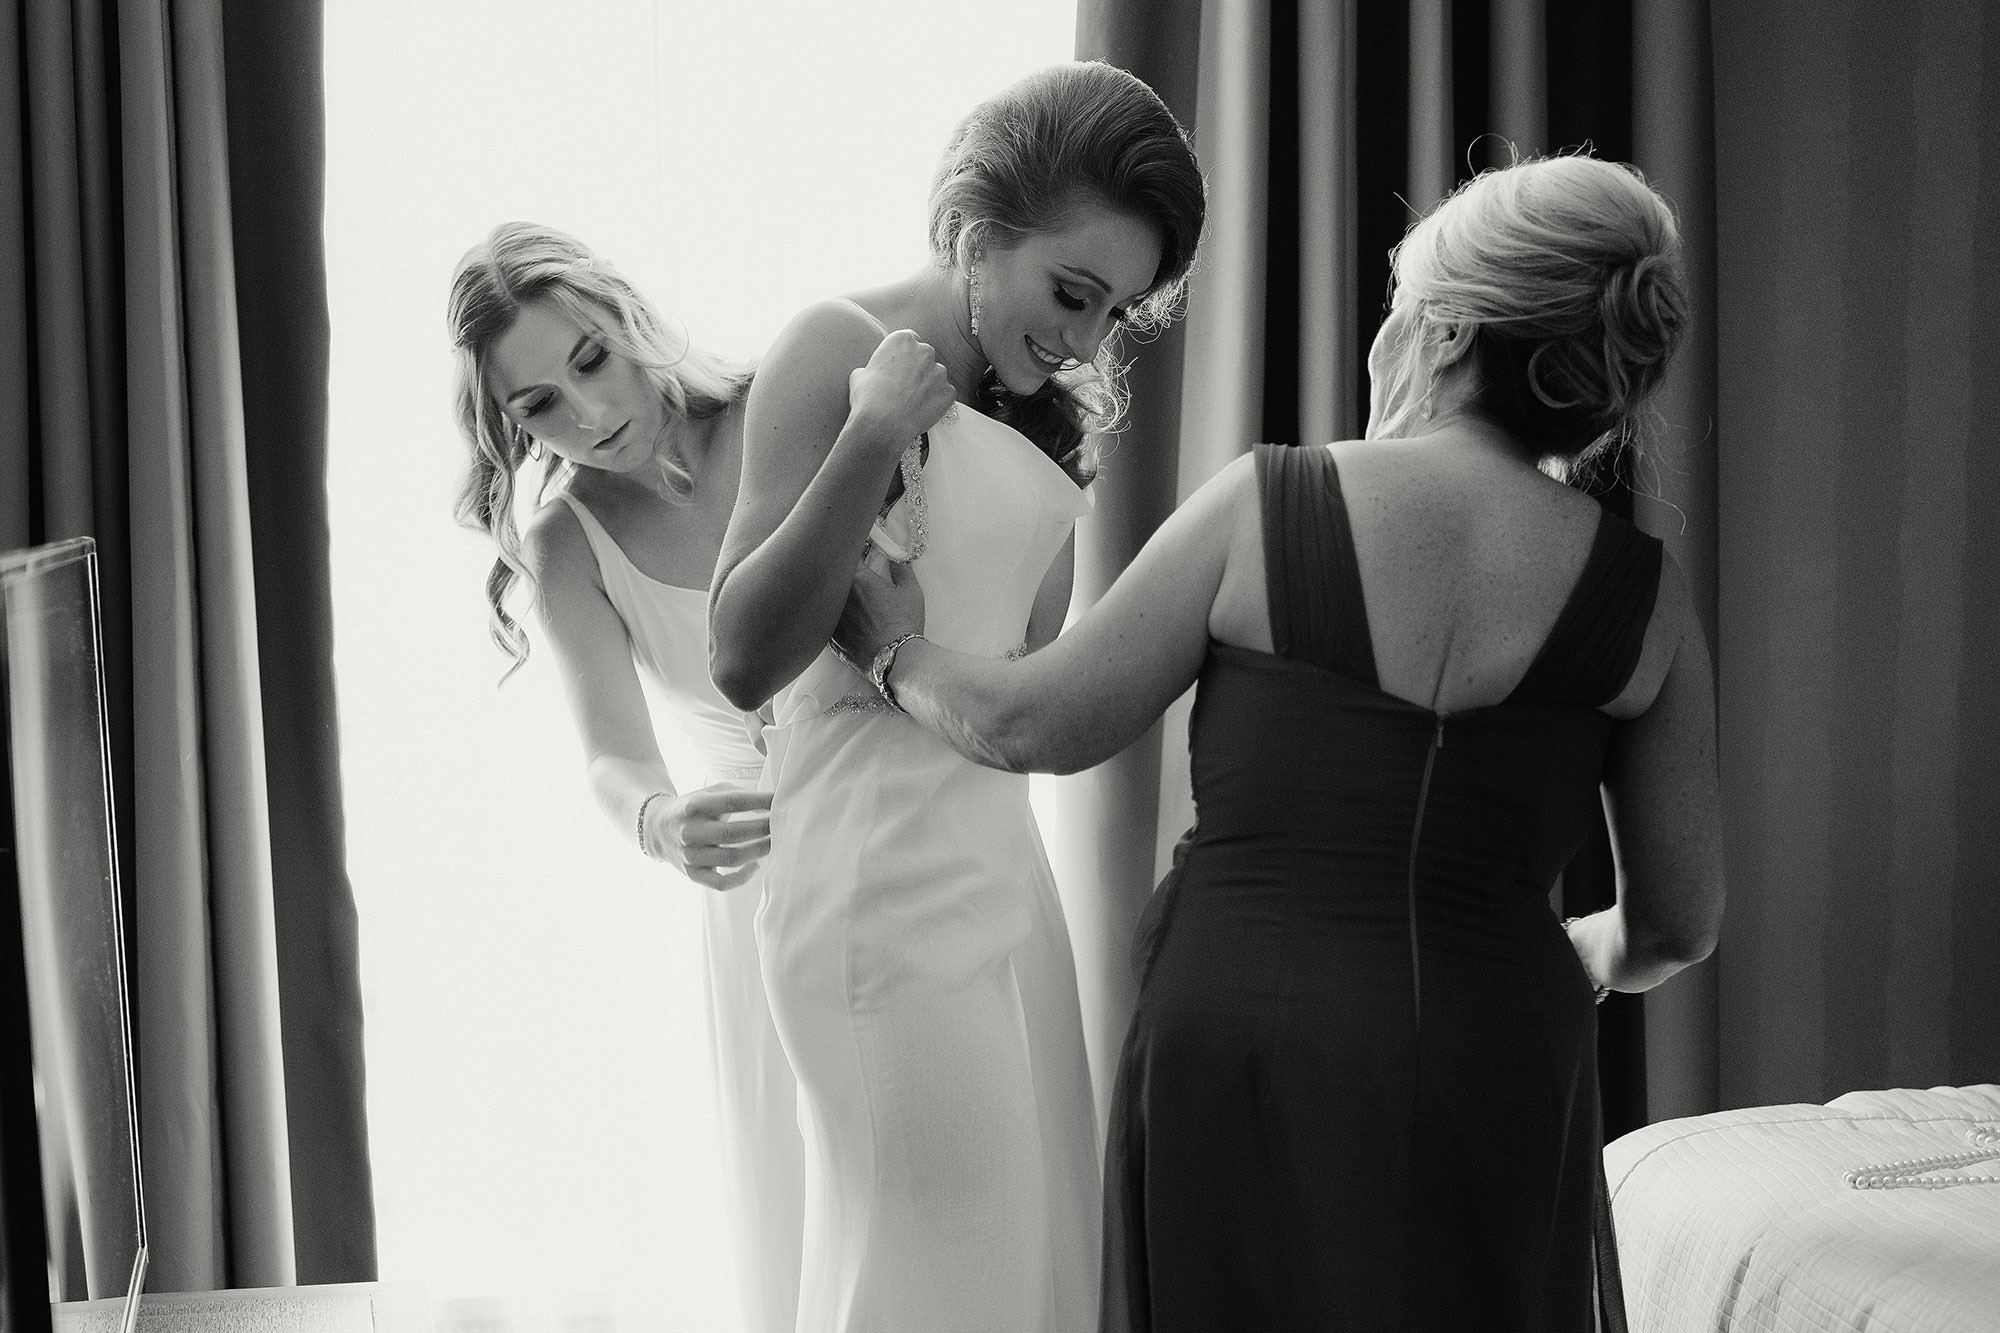 A bride is helped into her wedding dress by her mother and sister.